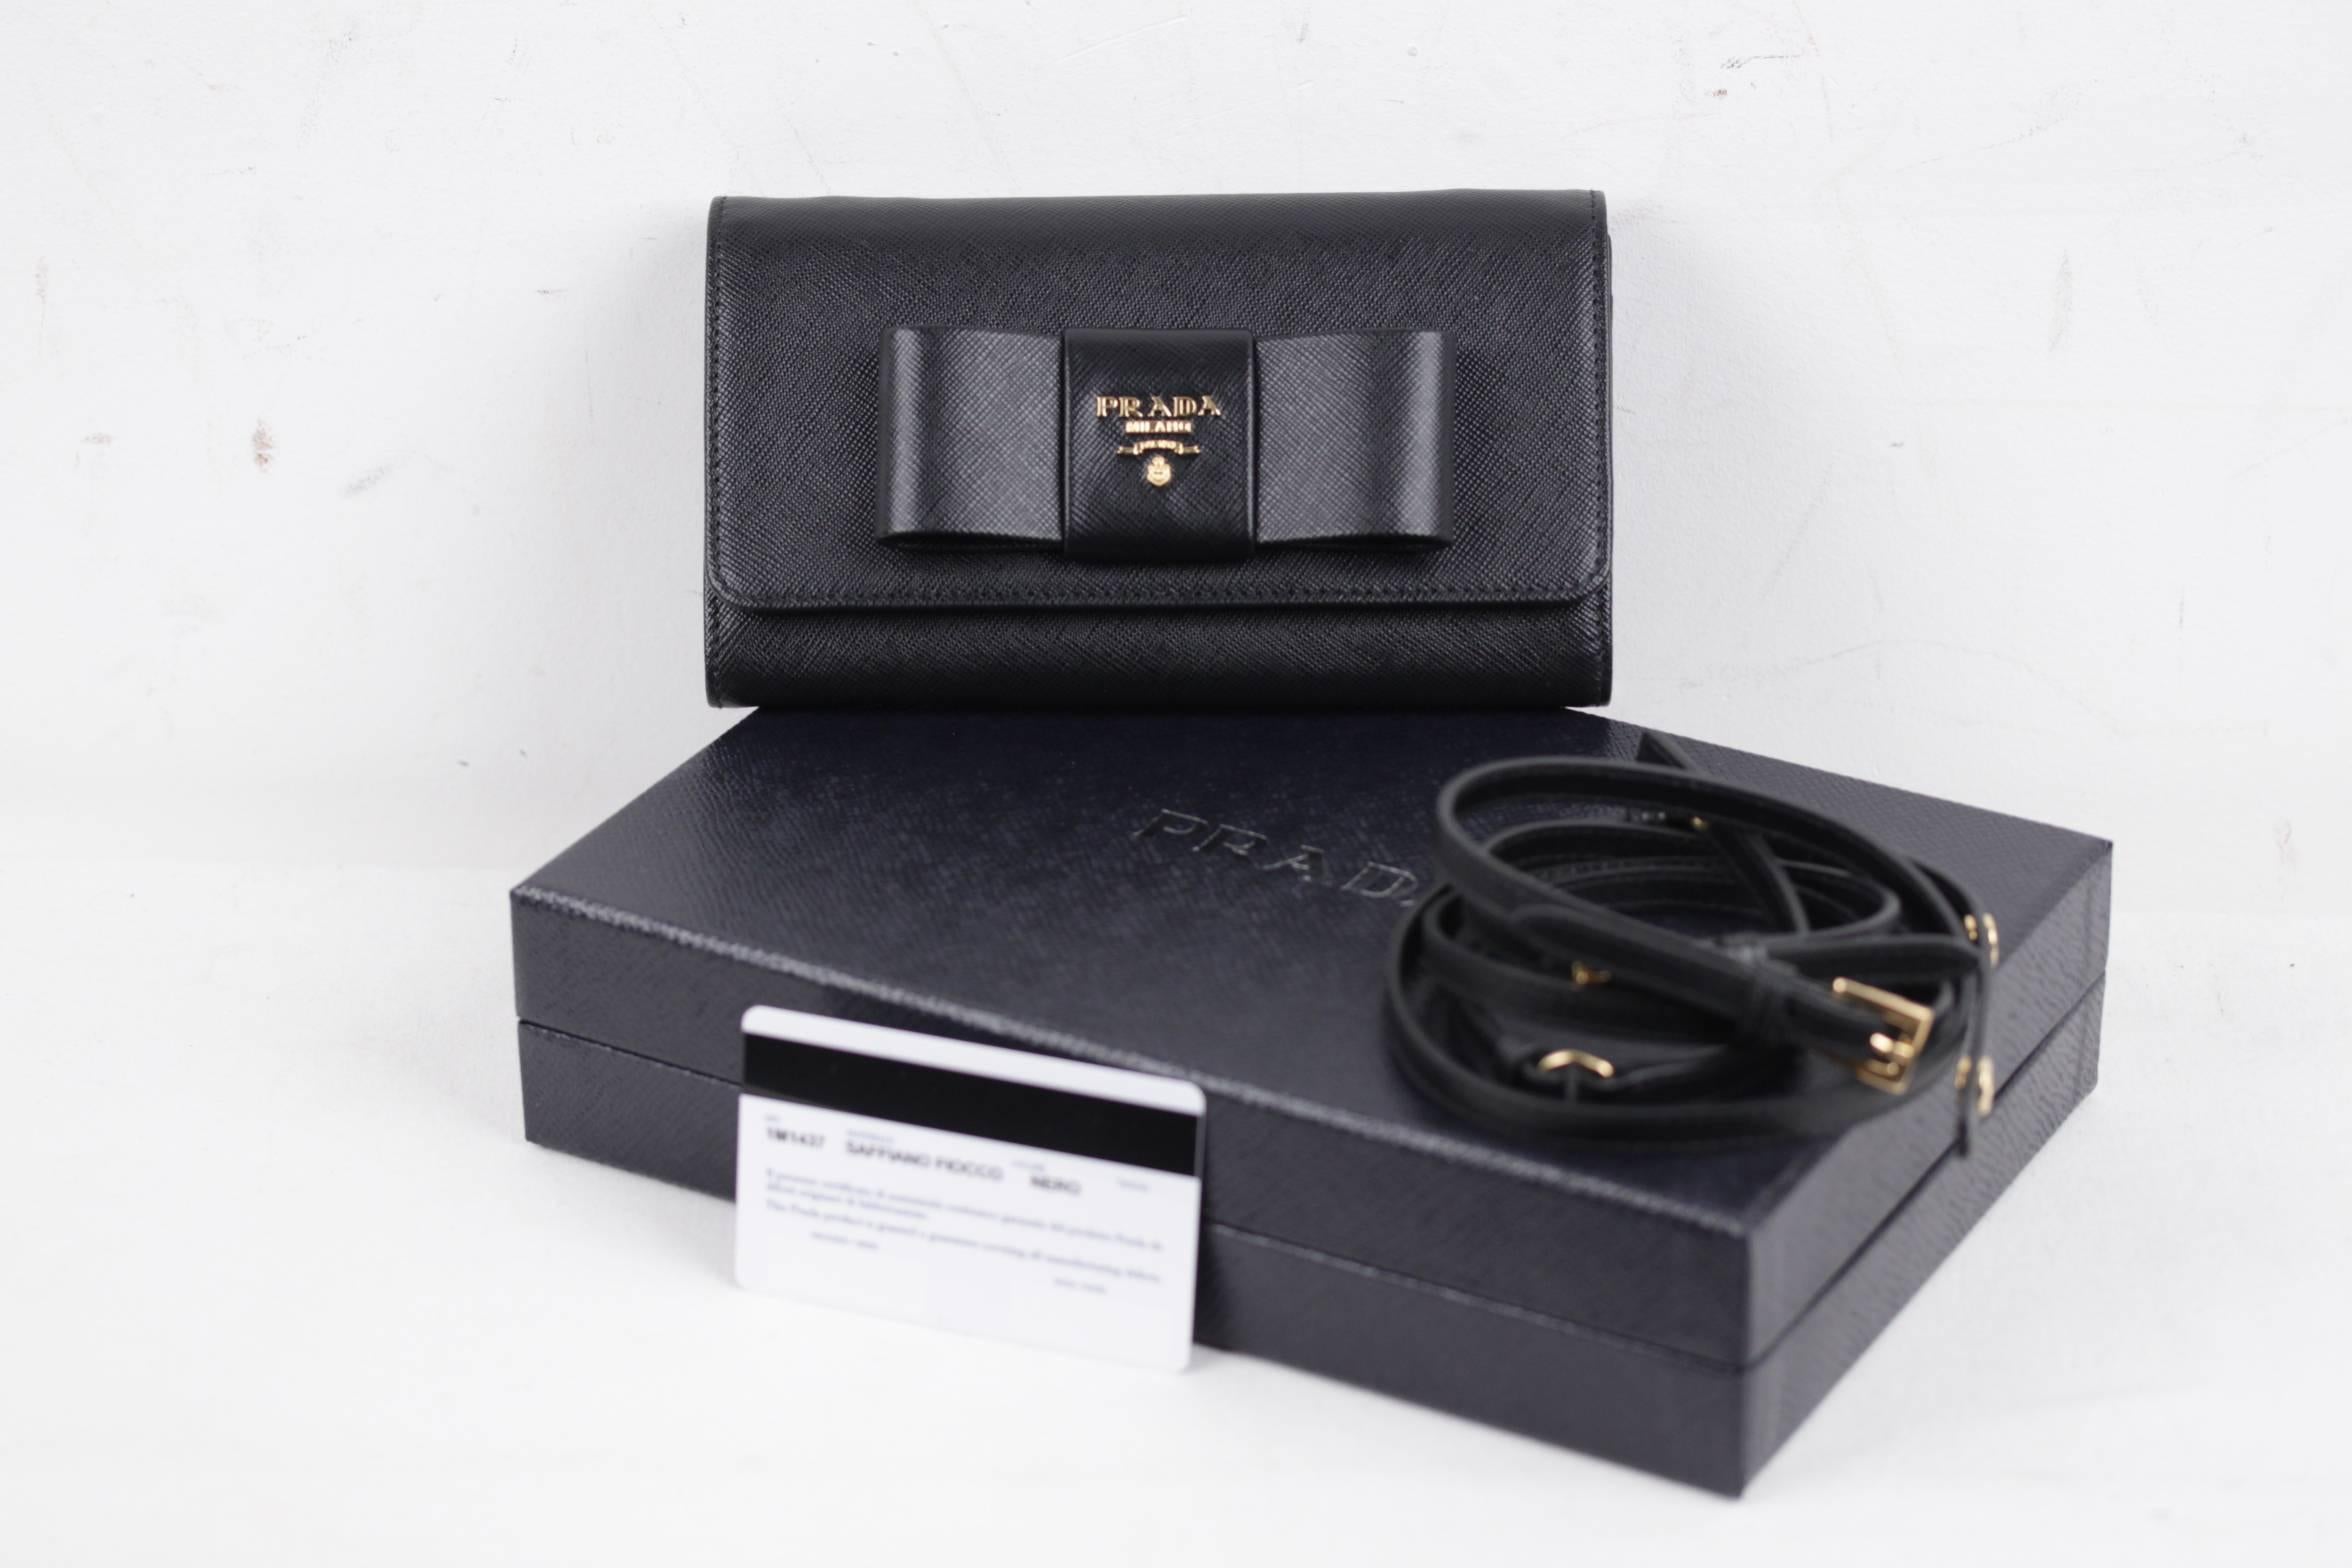 
- Saffiano leather flap wallet with leather bow on the front
- Color. Black (official PRADA color is NERO)
- Art. 1M1437 - SAFFIANO FIOCCO
- Gold-plated hardware
- PRADA Metal lettering logo
- Snap closure
- 6 credit card slots
- 1 coin